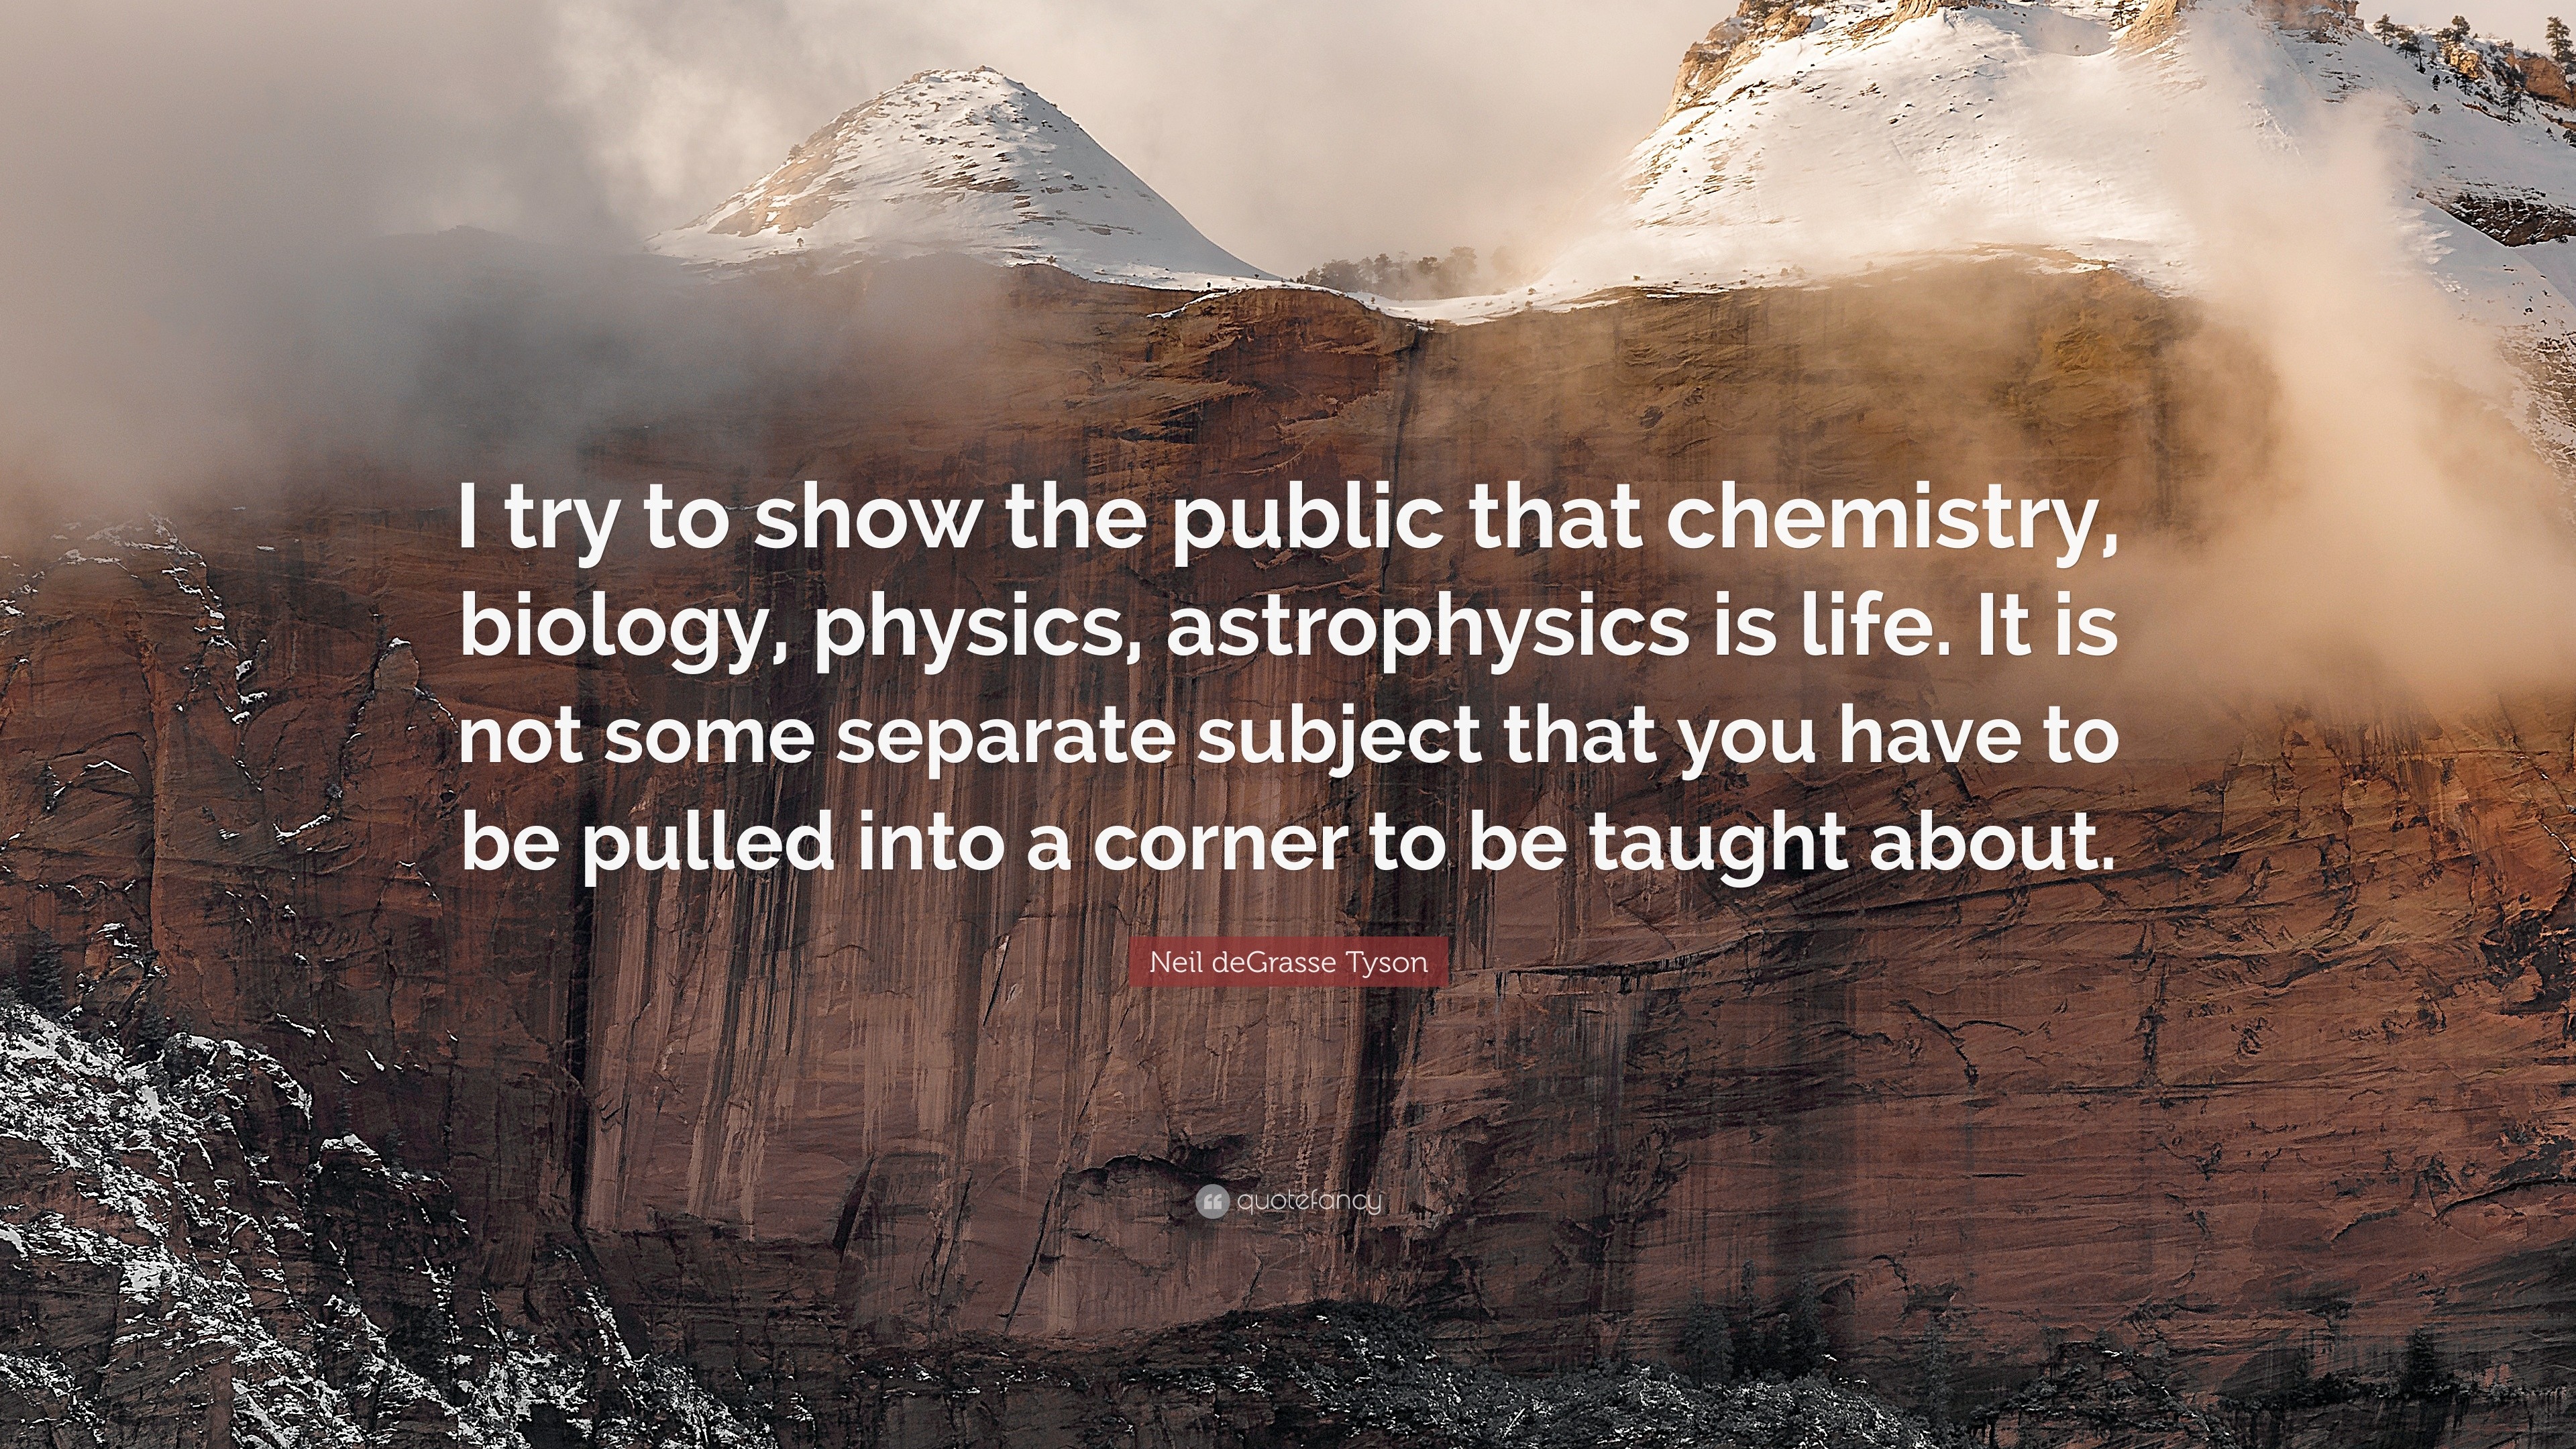 Neil deGrasse Tyson Quote: “I try to show the public that chemistry, biology, physics